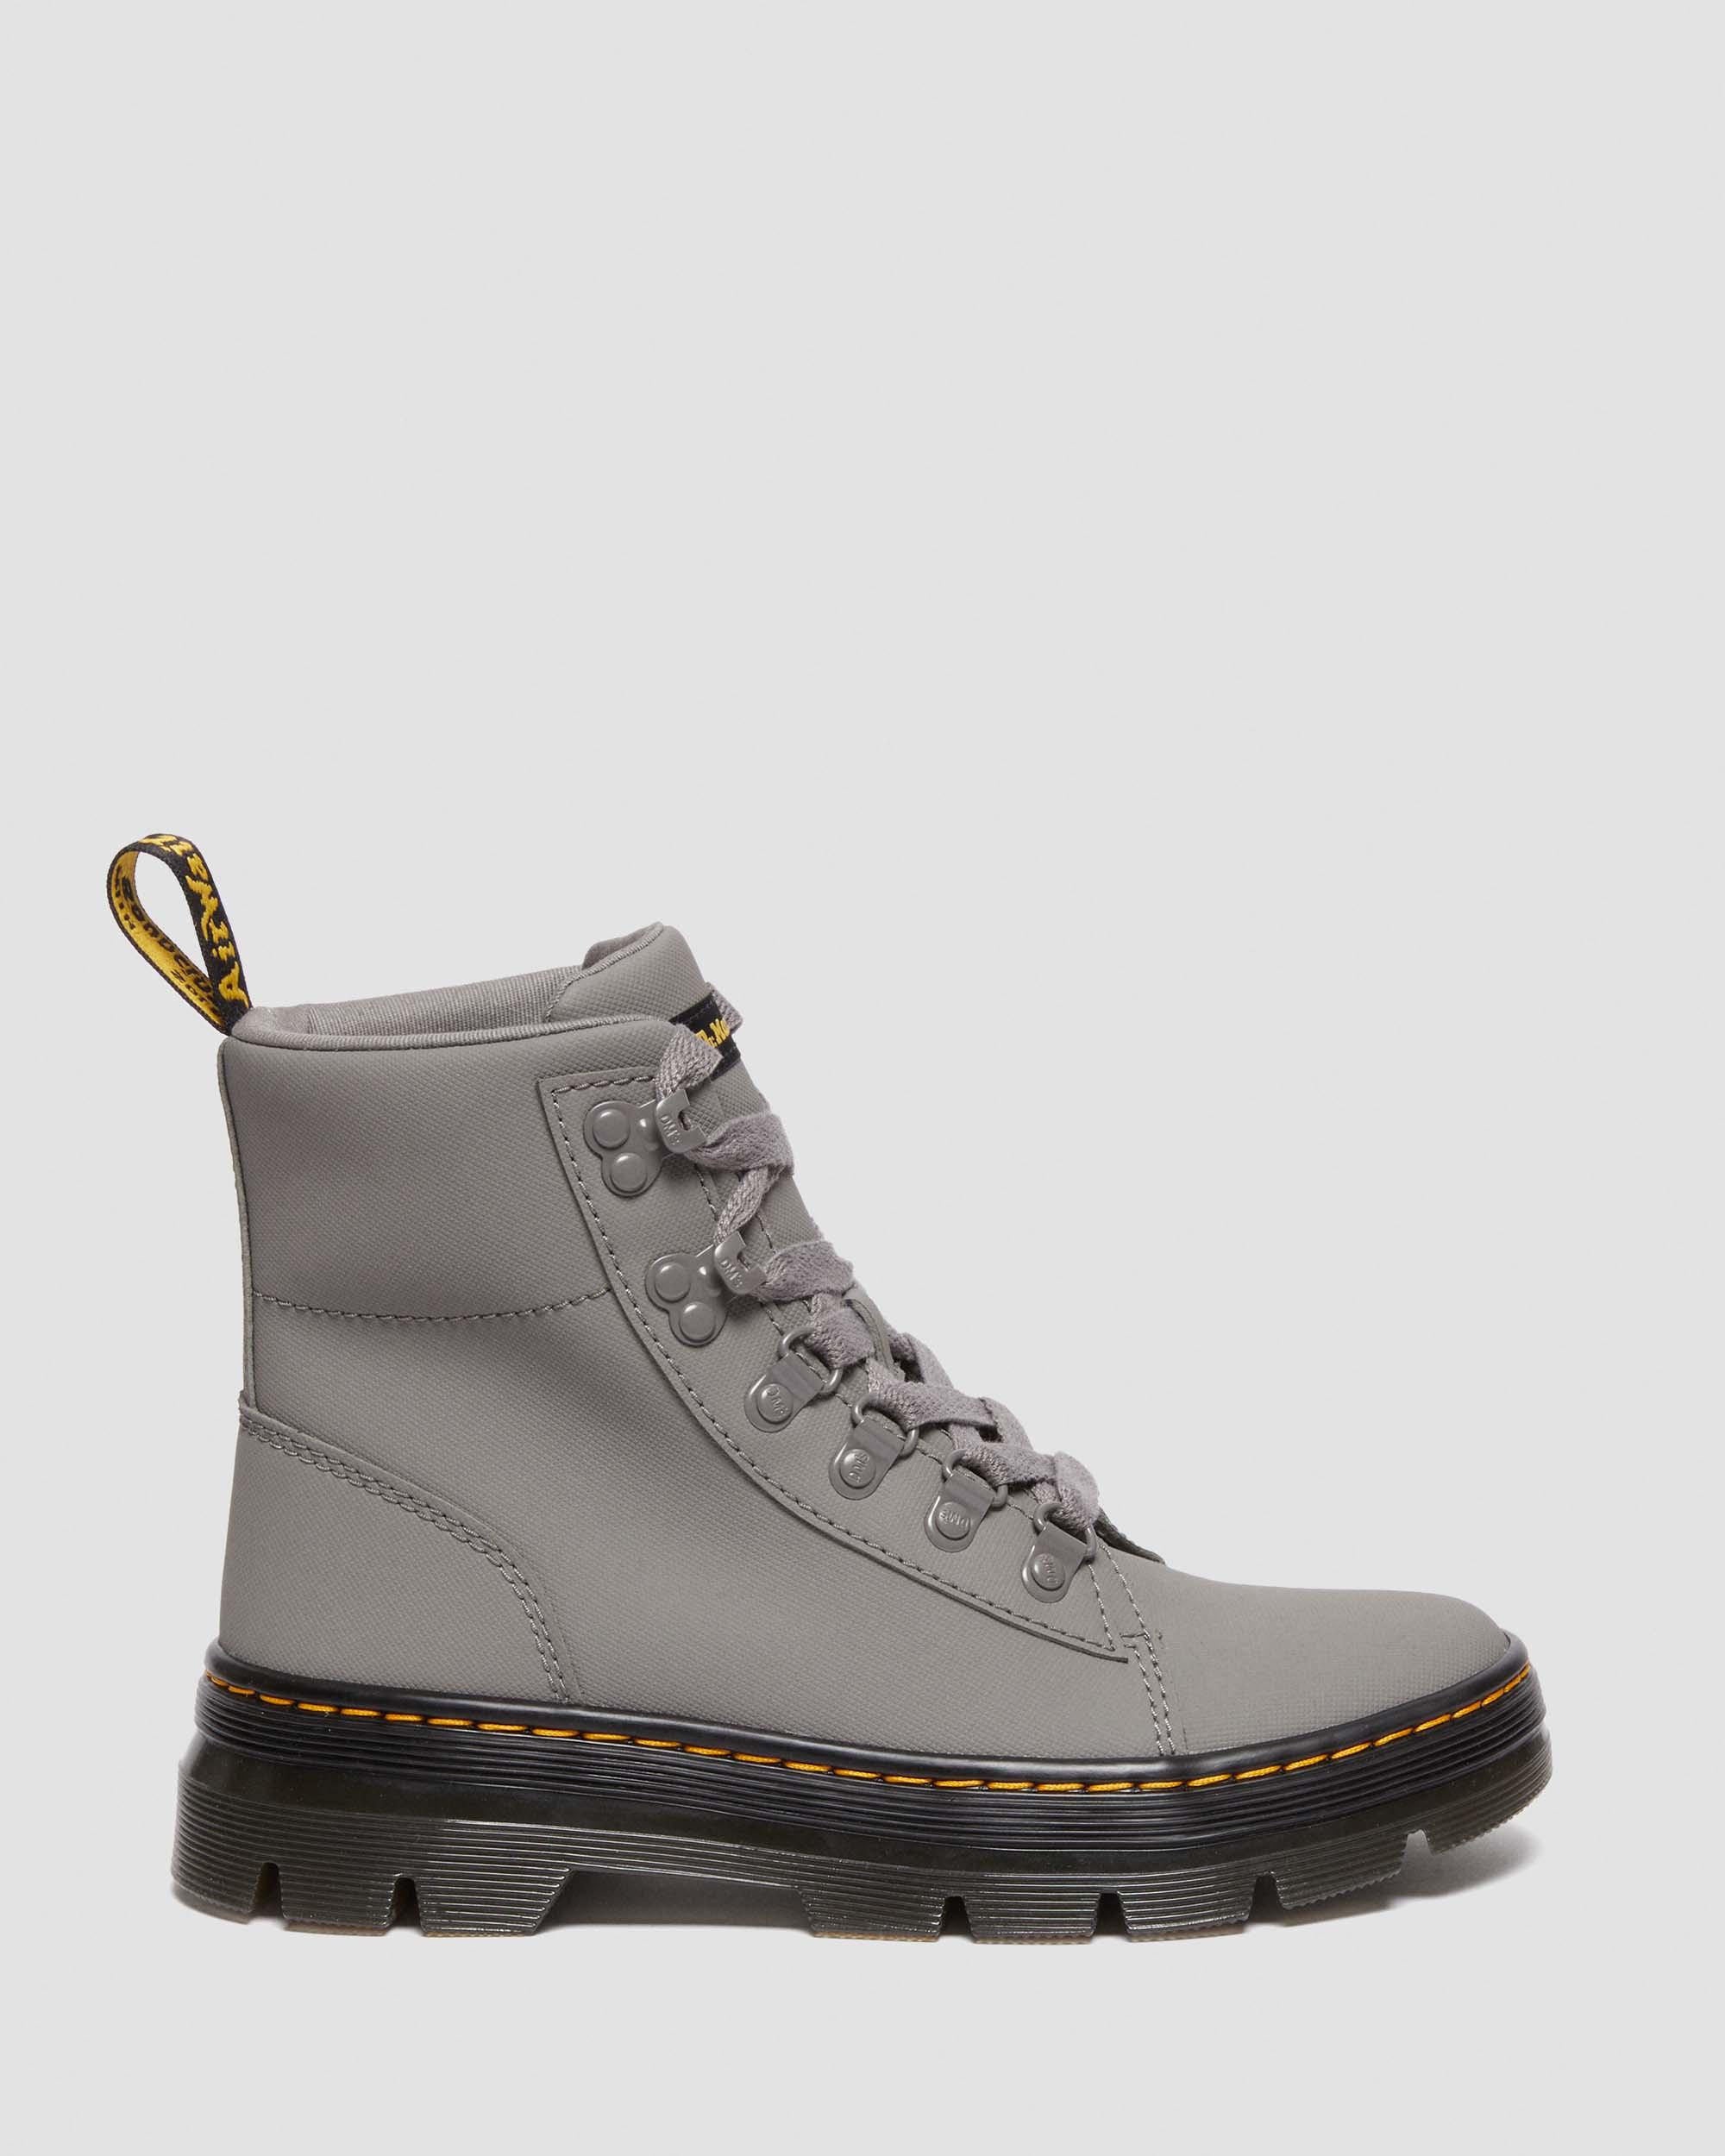 Womens Dr. Martens Combs Boot - White